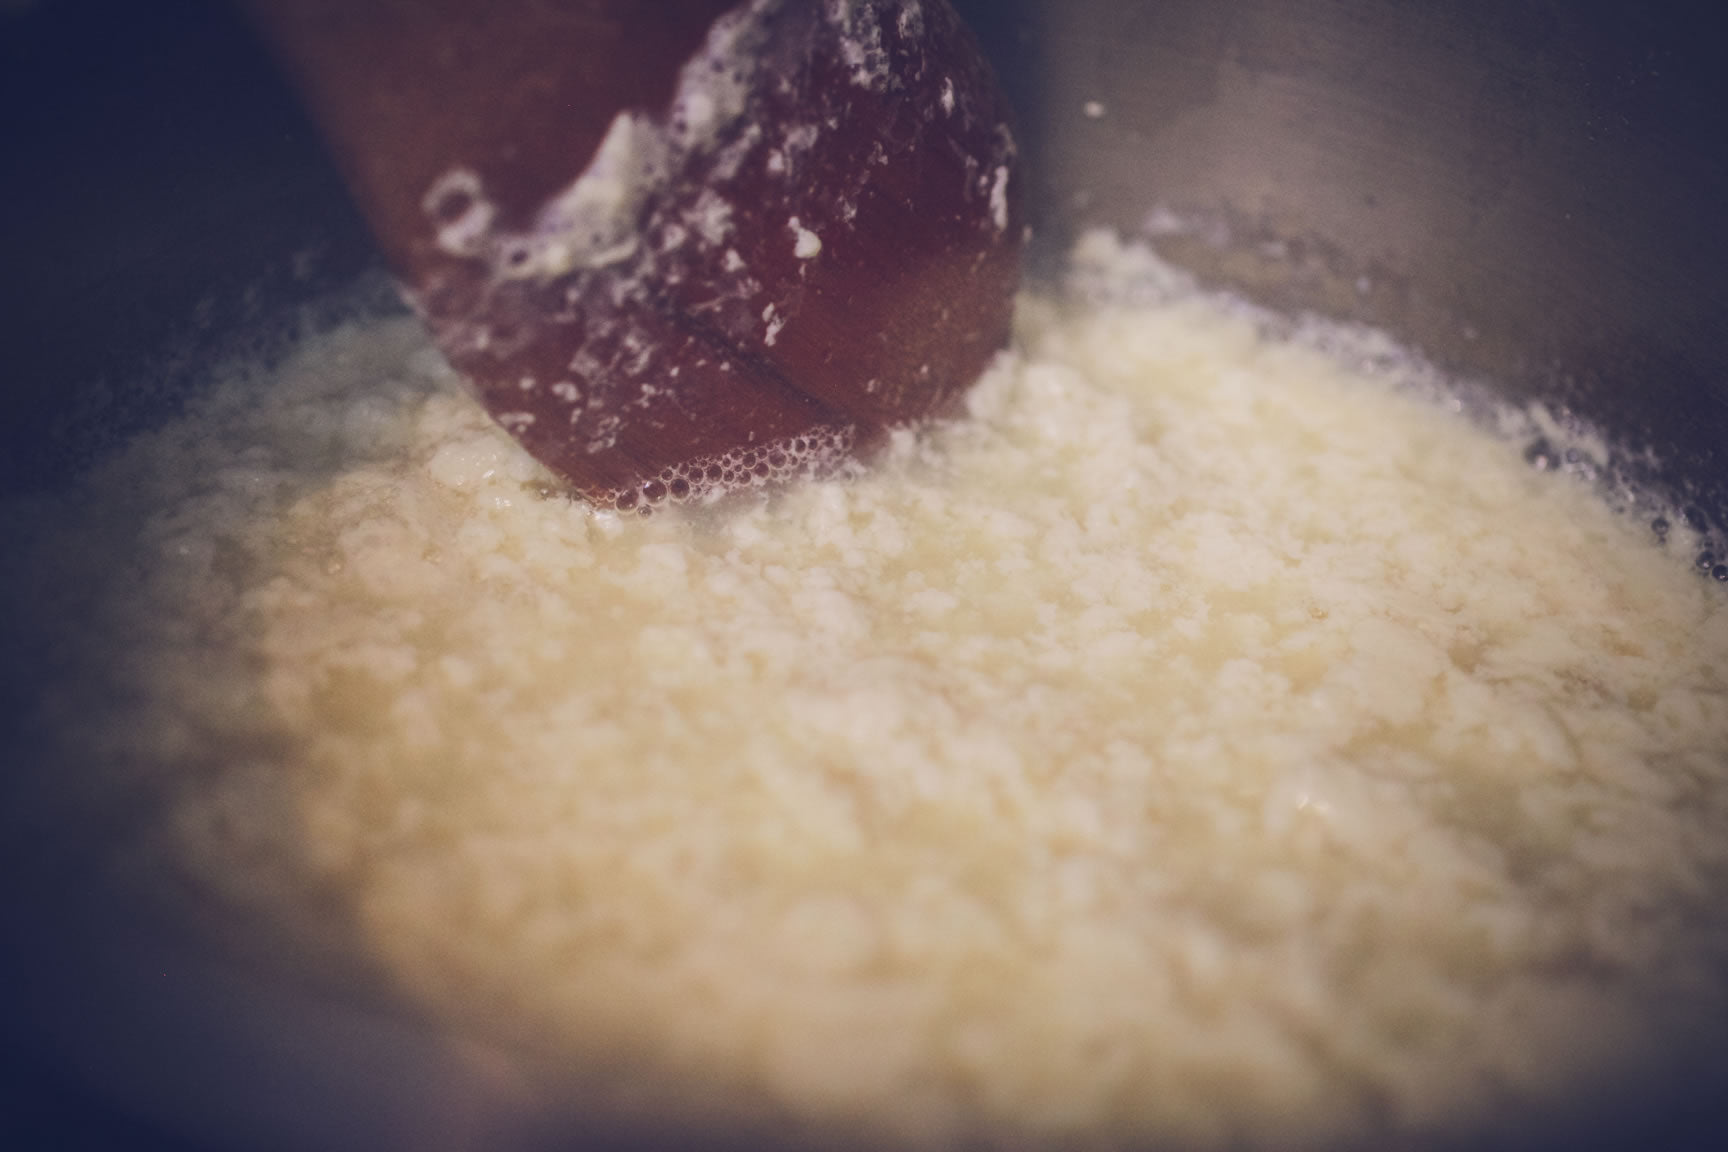 curds and whey